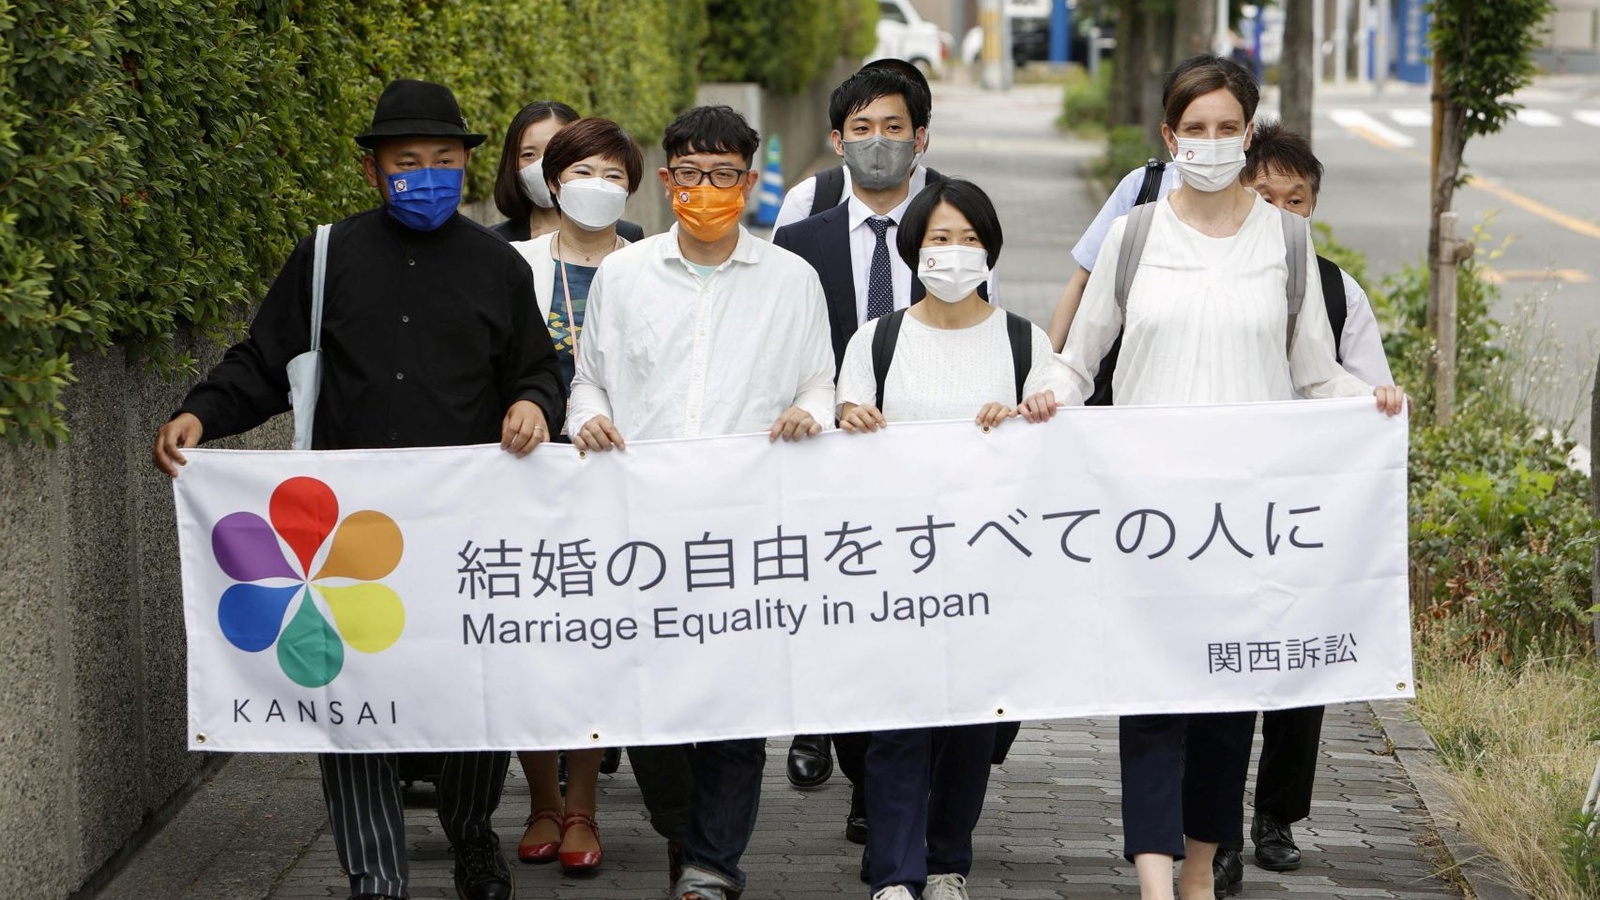 Mixed Messages From Japanese Courts on Same-Sex Marriage Council on Foreign Relations picture